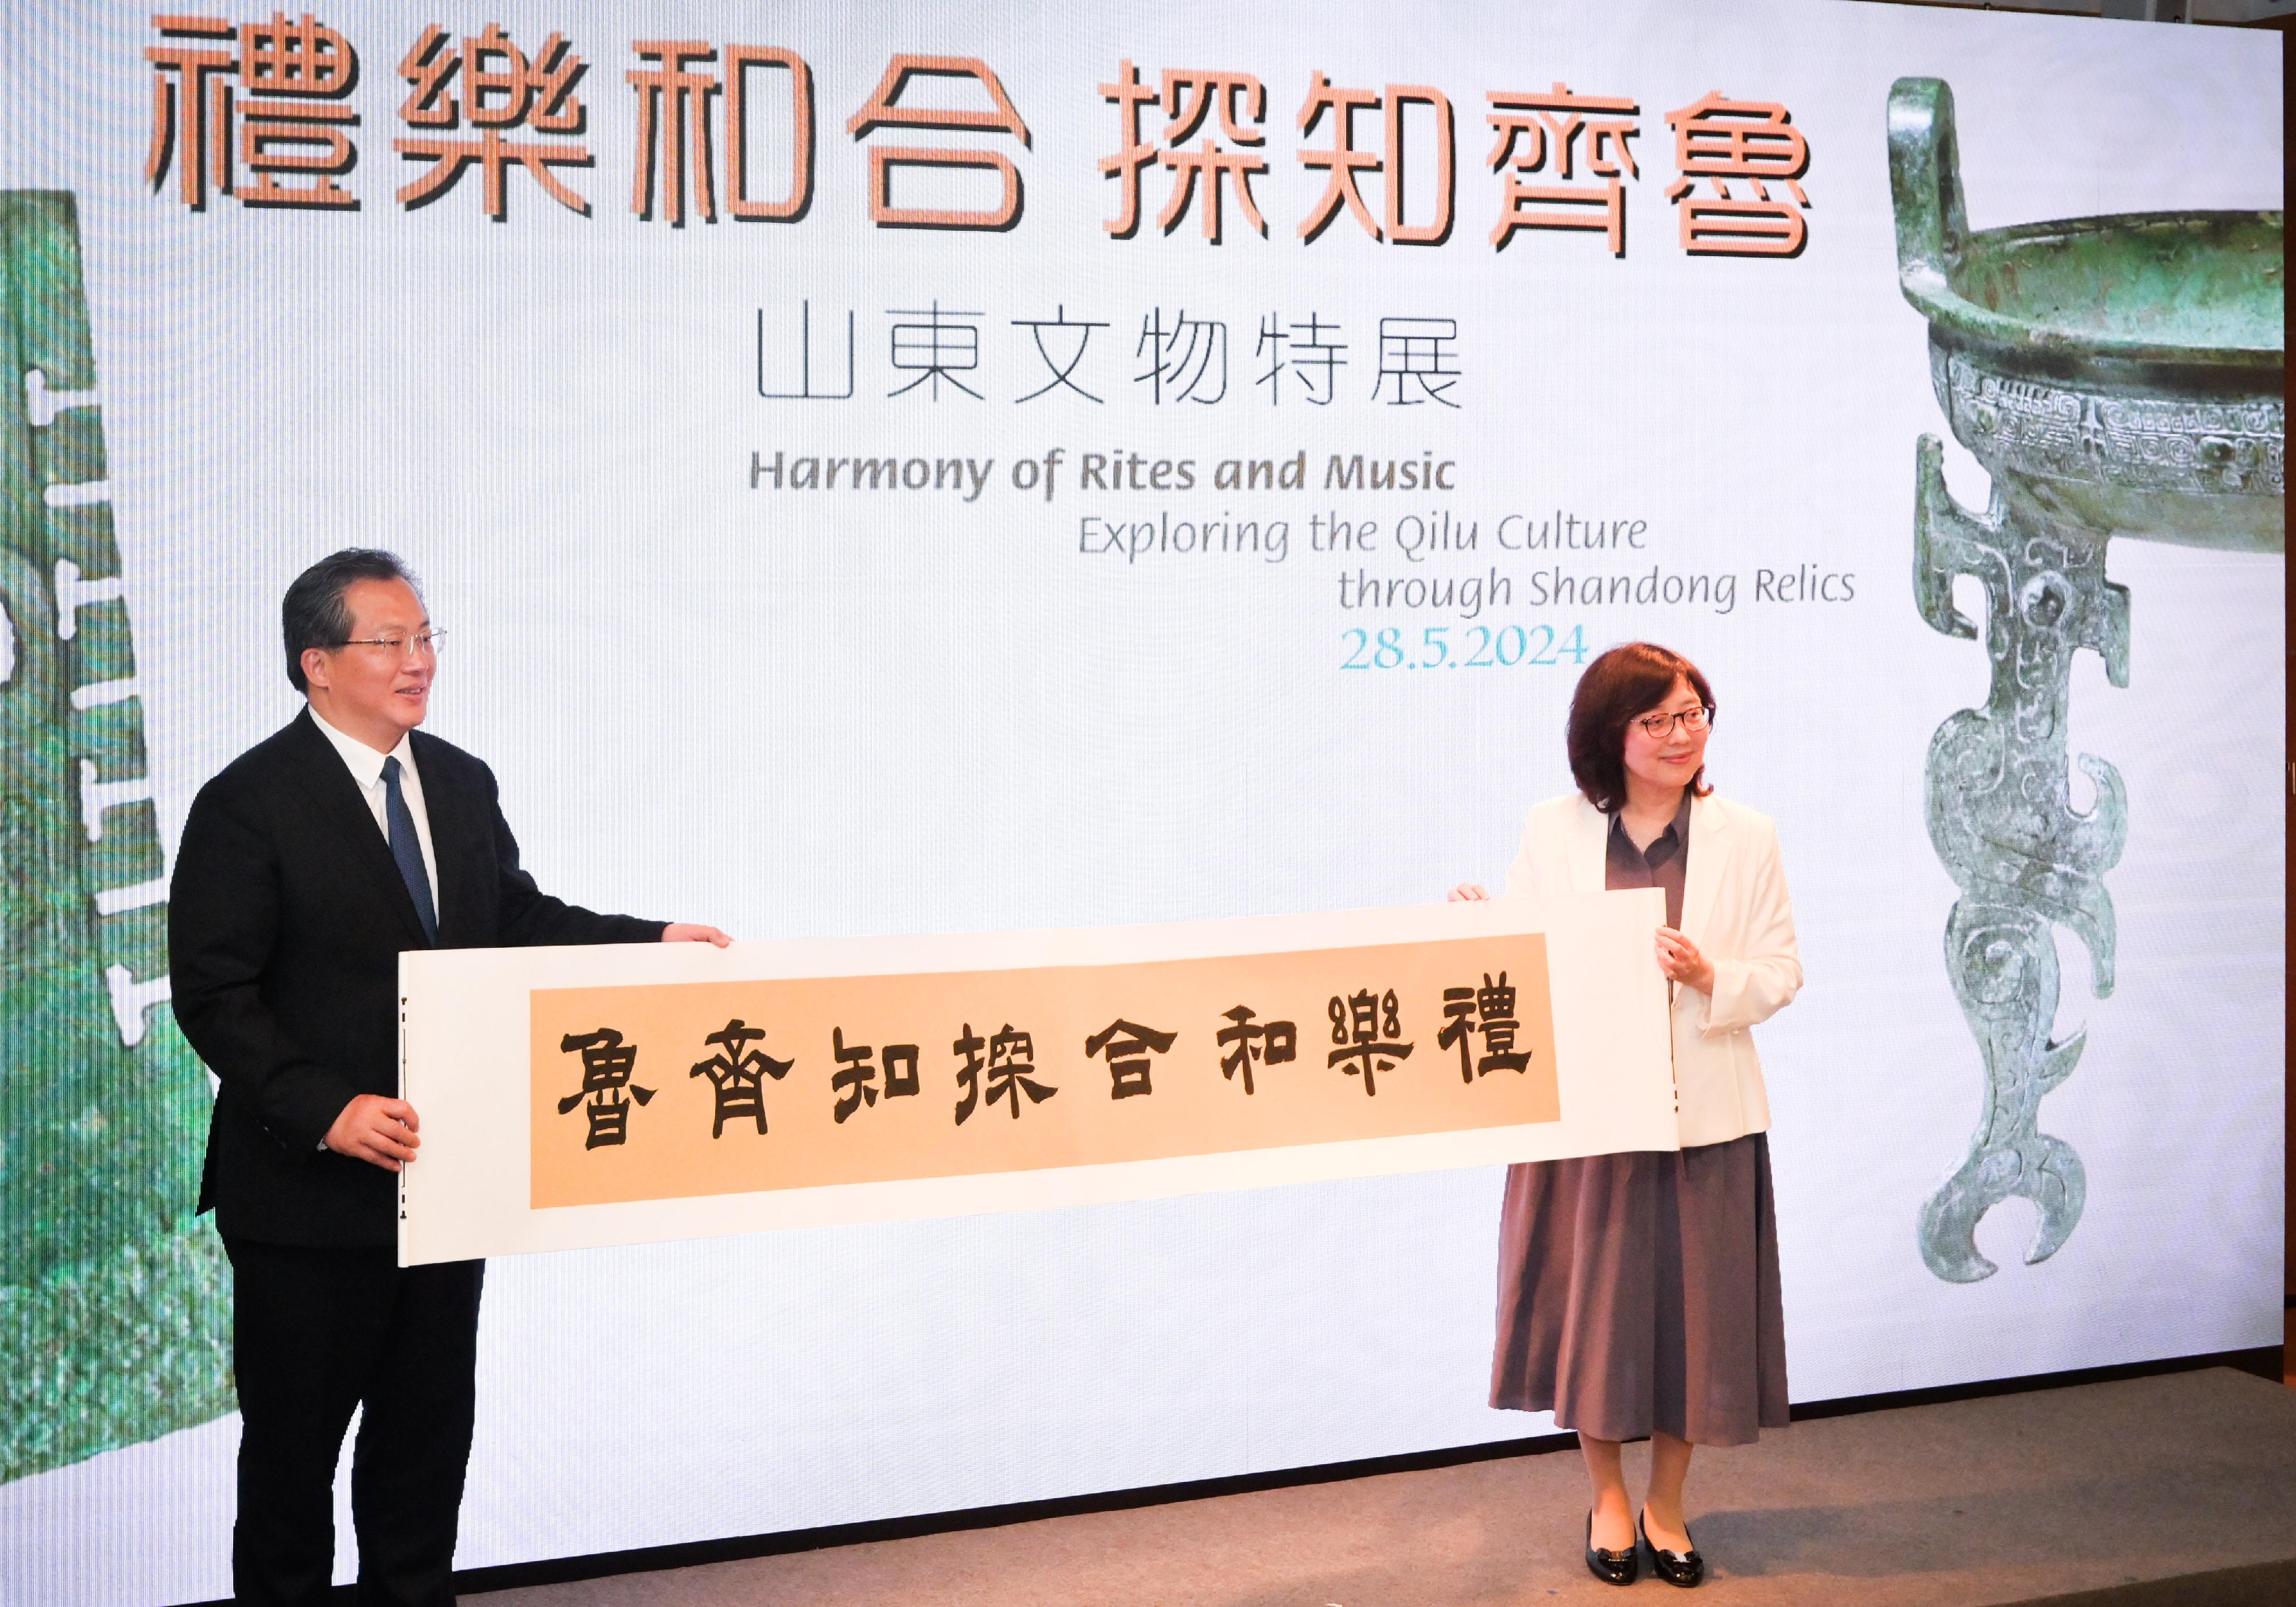 The "Harmony of Rites and Music: Exploring the Qilu Culture through Shandong Relics" exhibition opened today (May 28). Photo shows the Secretary for Development, Ms Bernadette Linn (right); and the Standing Committee Member and the Secretary-General of the Shandong Provincial Committee, Mr Fan Bo (left), officiating at the opening ceremony.